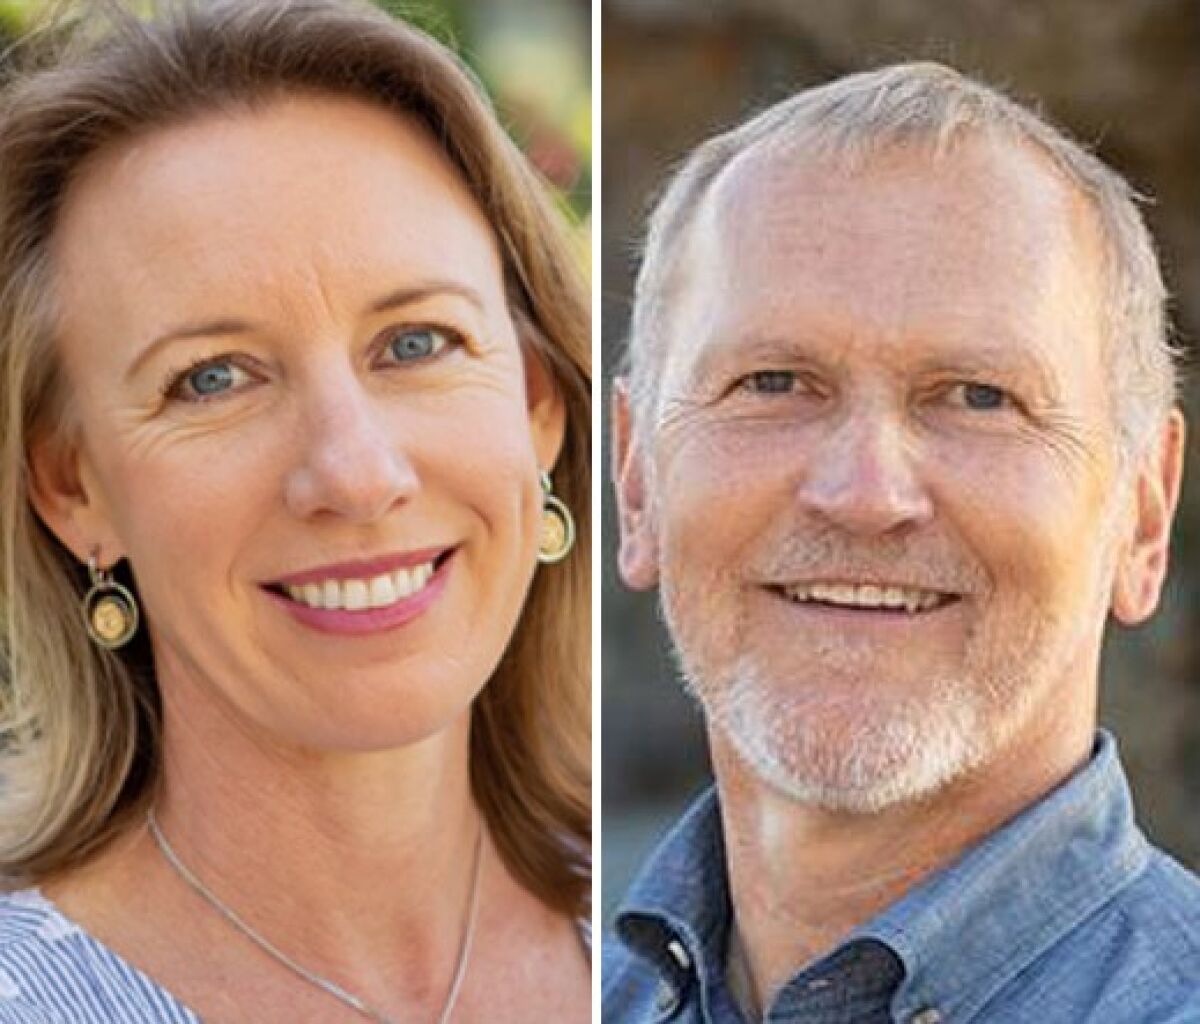 Catherine Blakespear and Matt Gunderson are on their way to the November election in California Senate District 38.